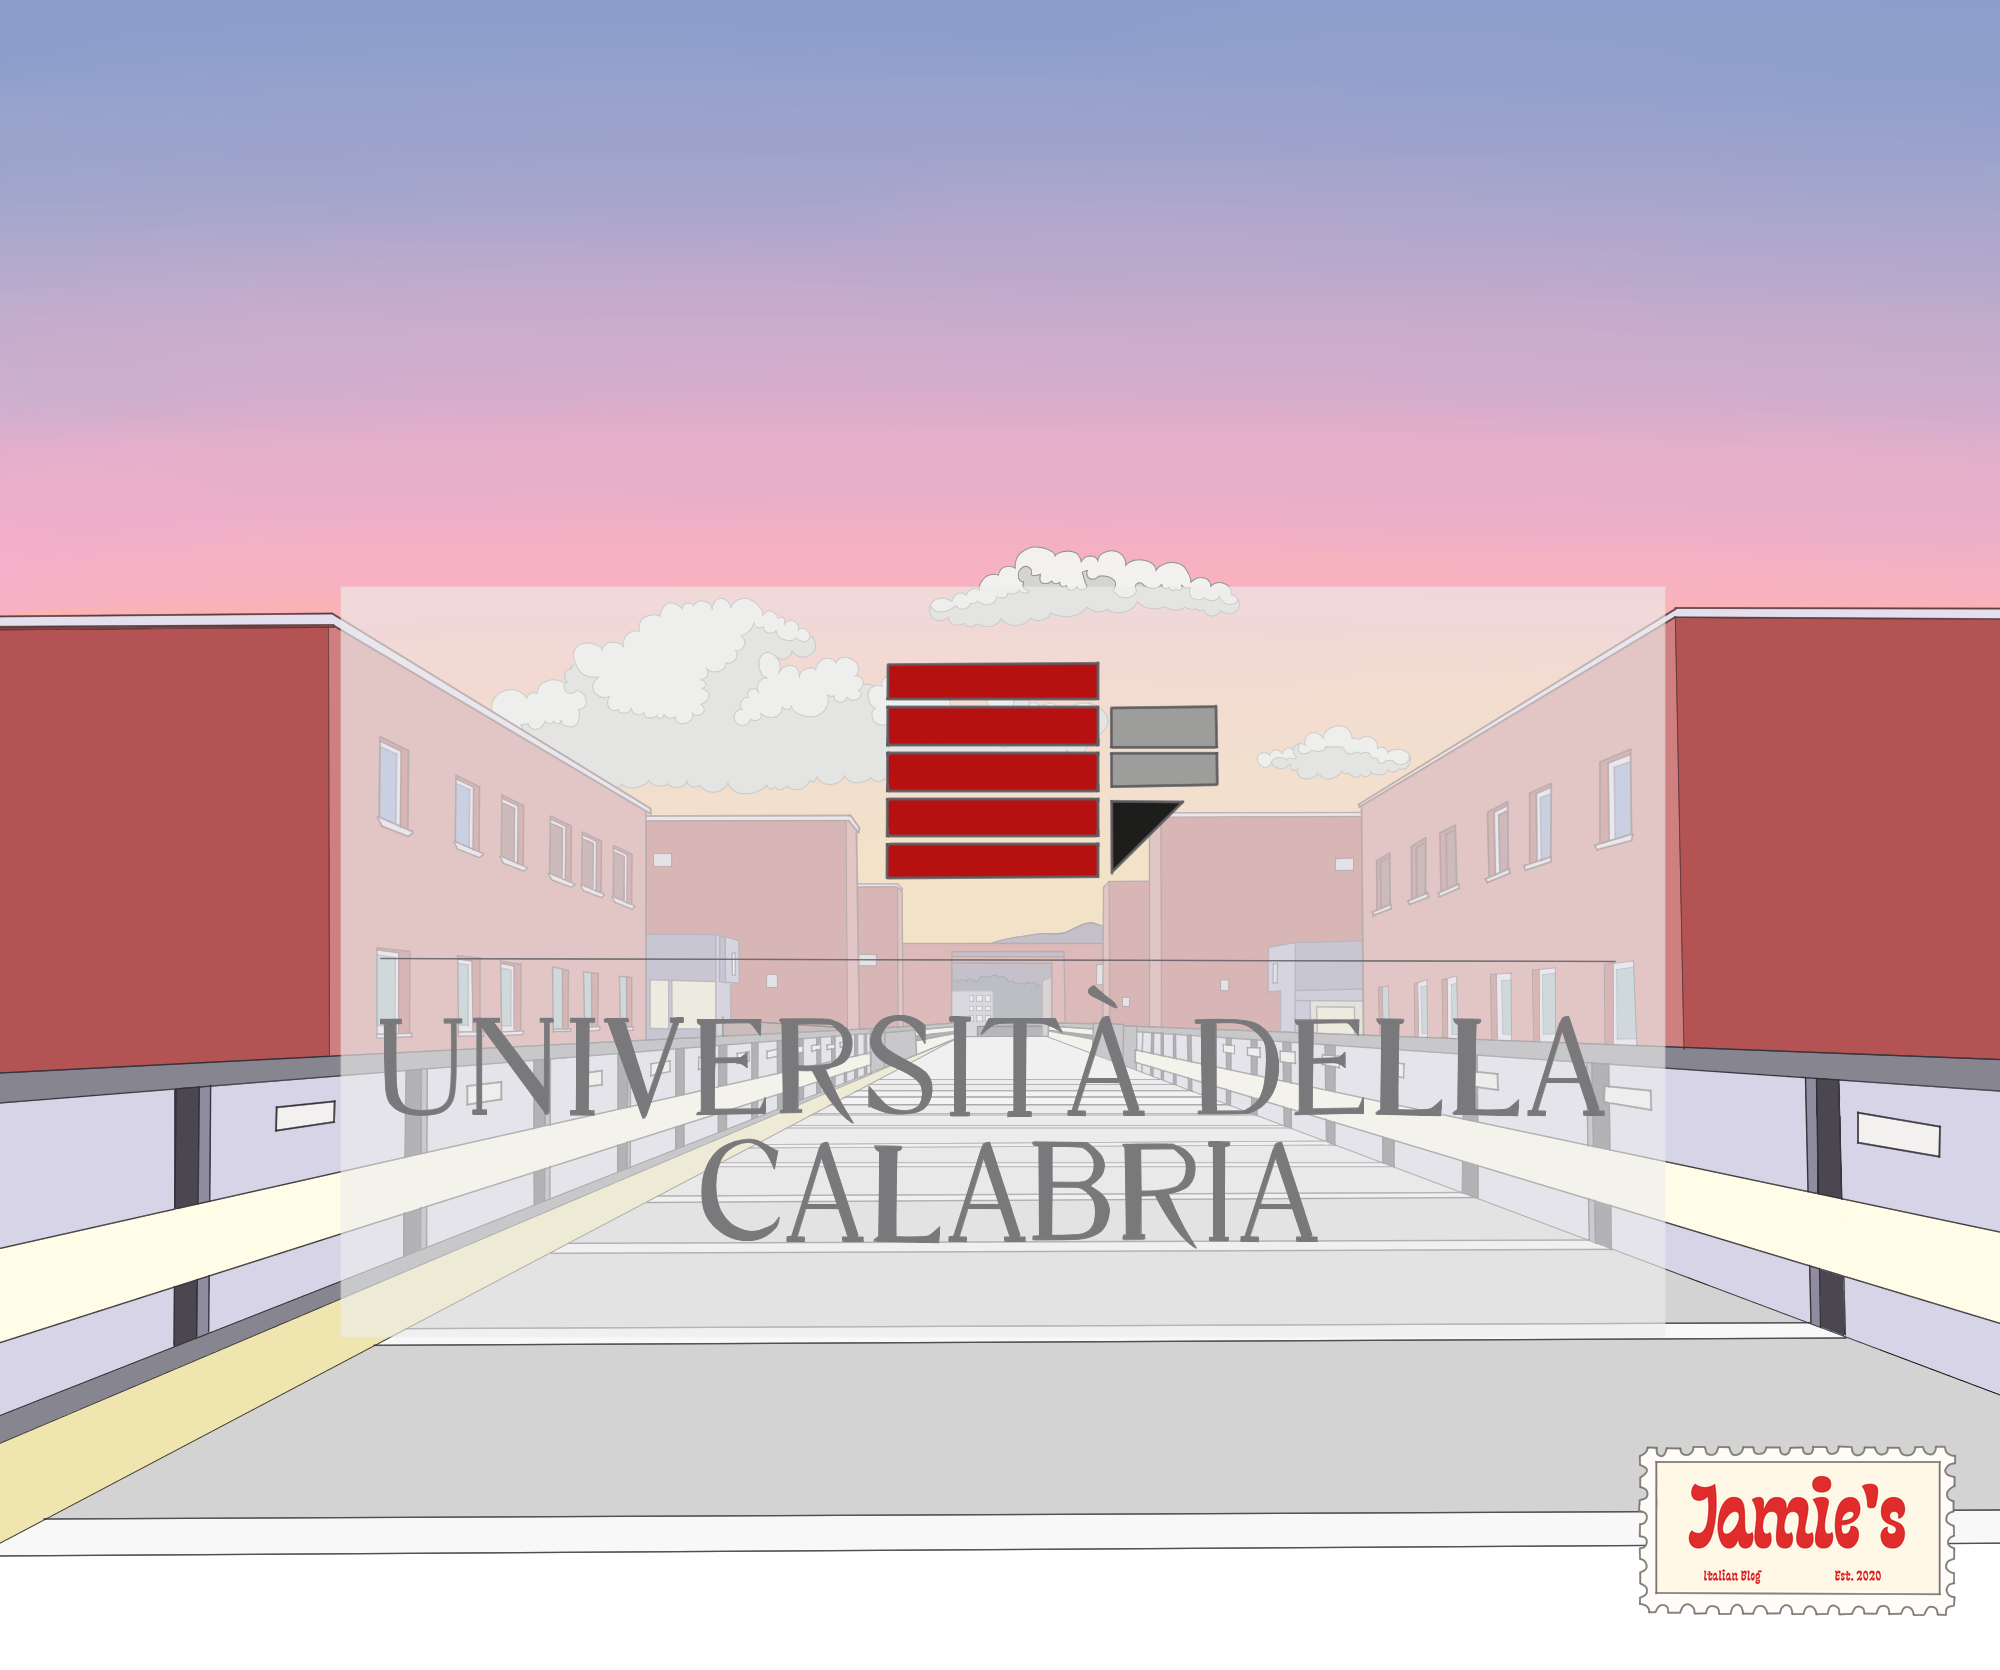 The University of Calabria